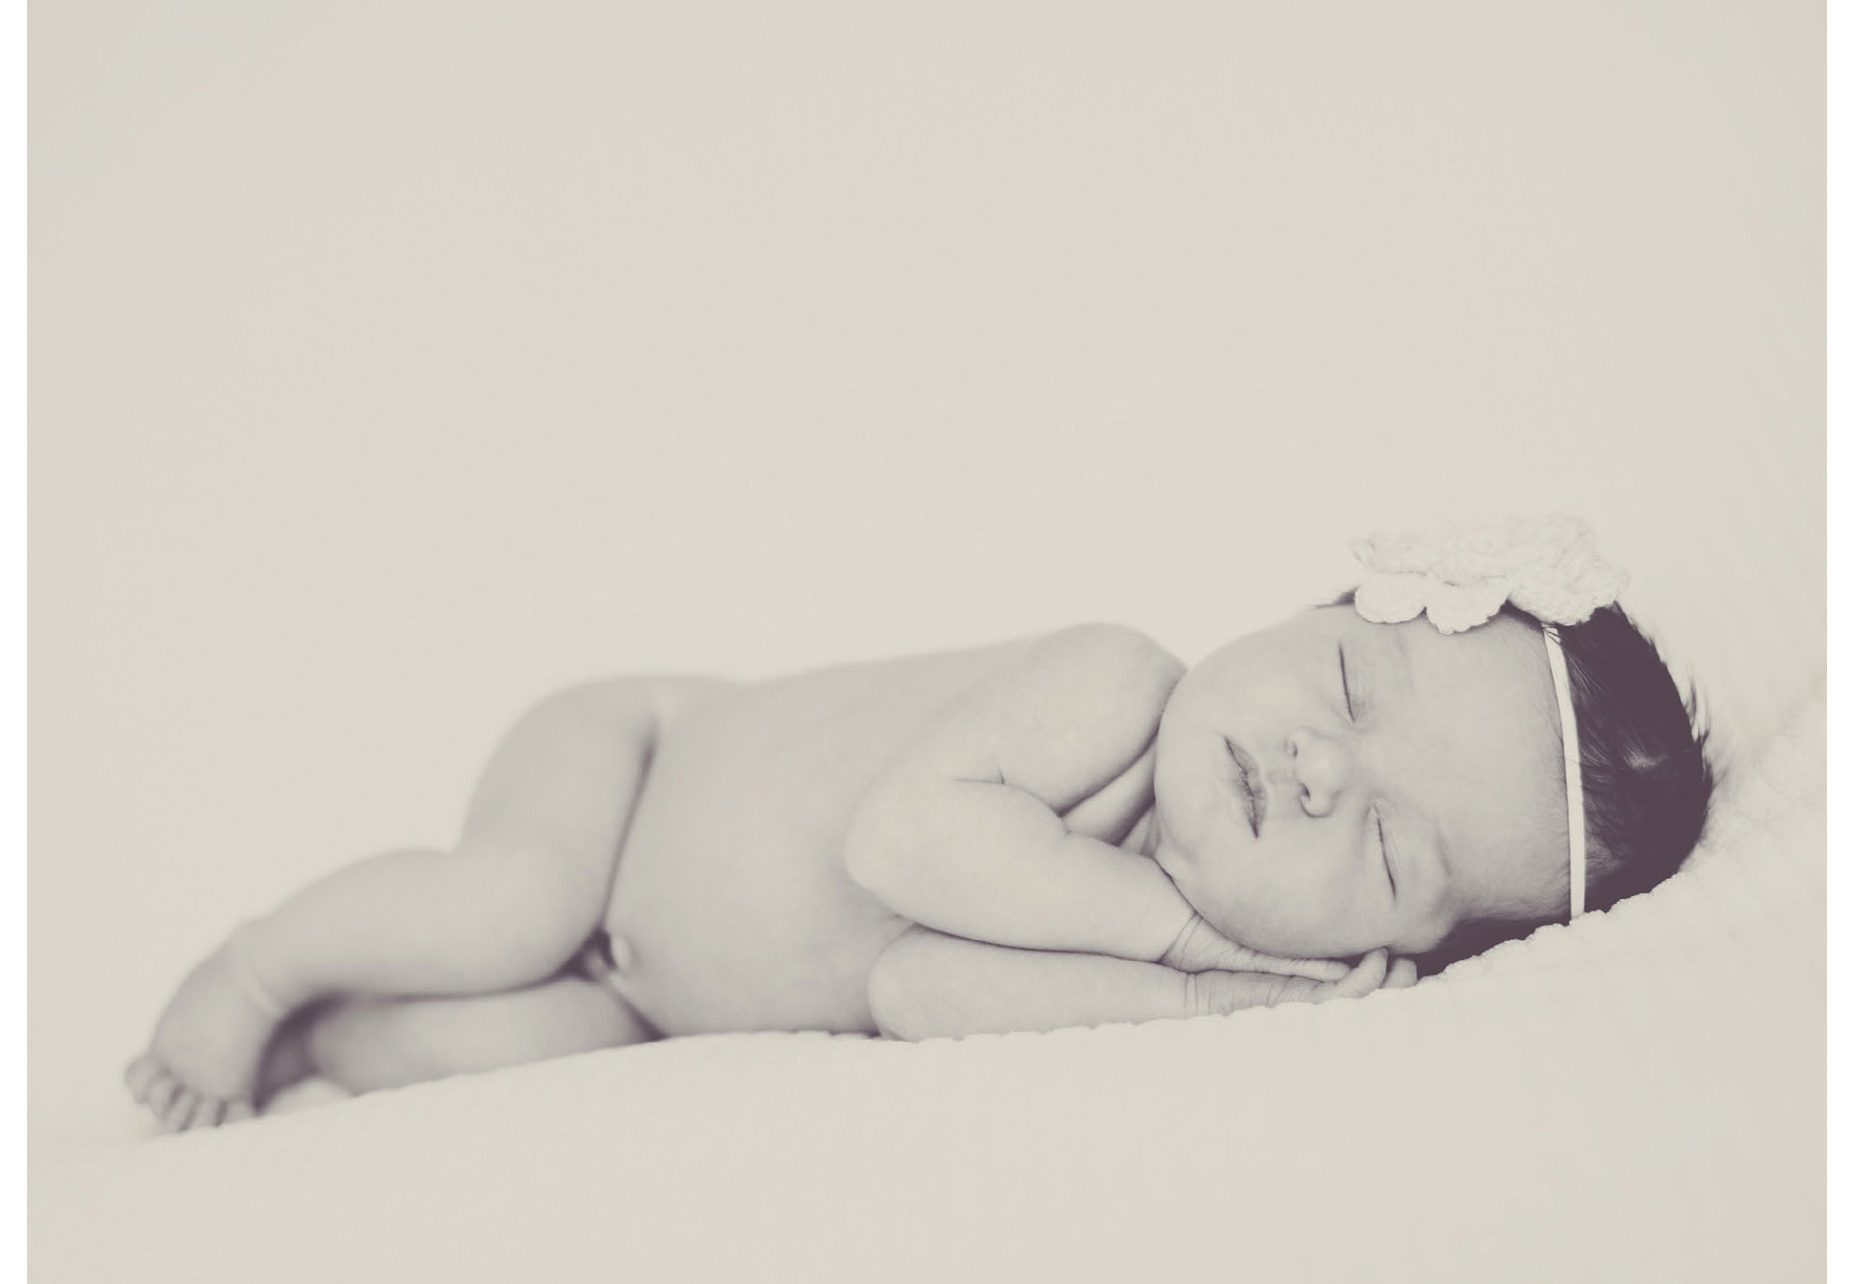 Images by Jenica Knight Photography Words cannot express the joy of new life - photo 19